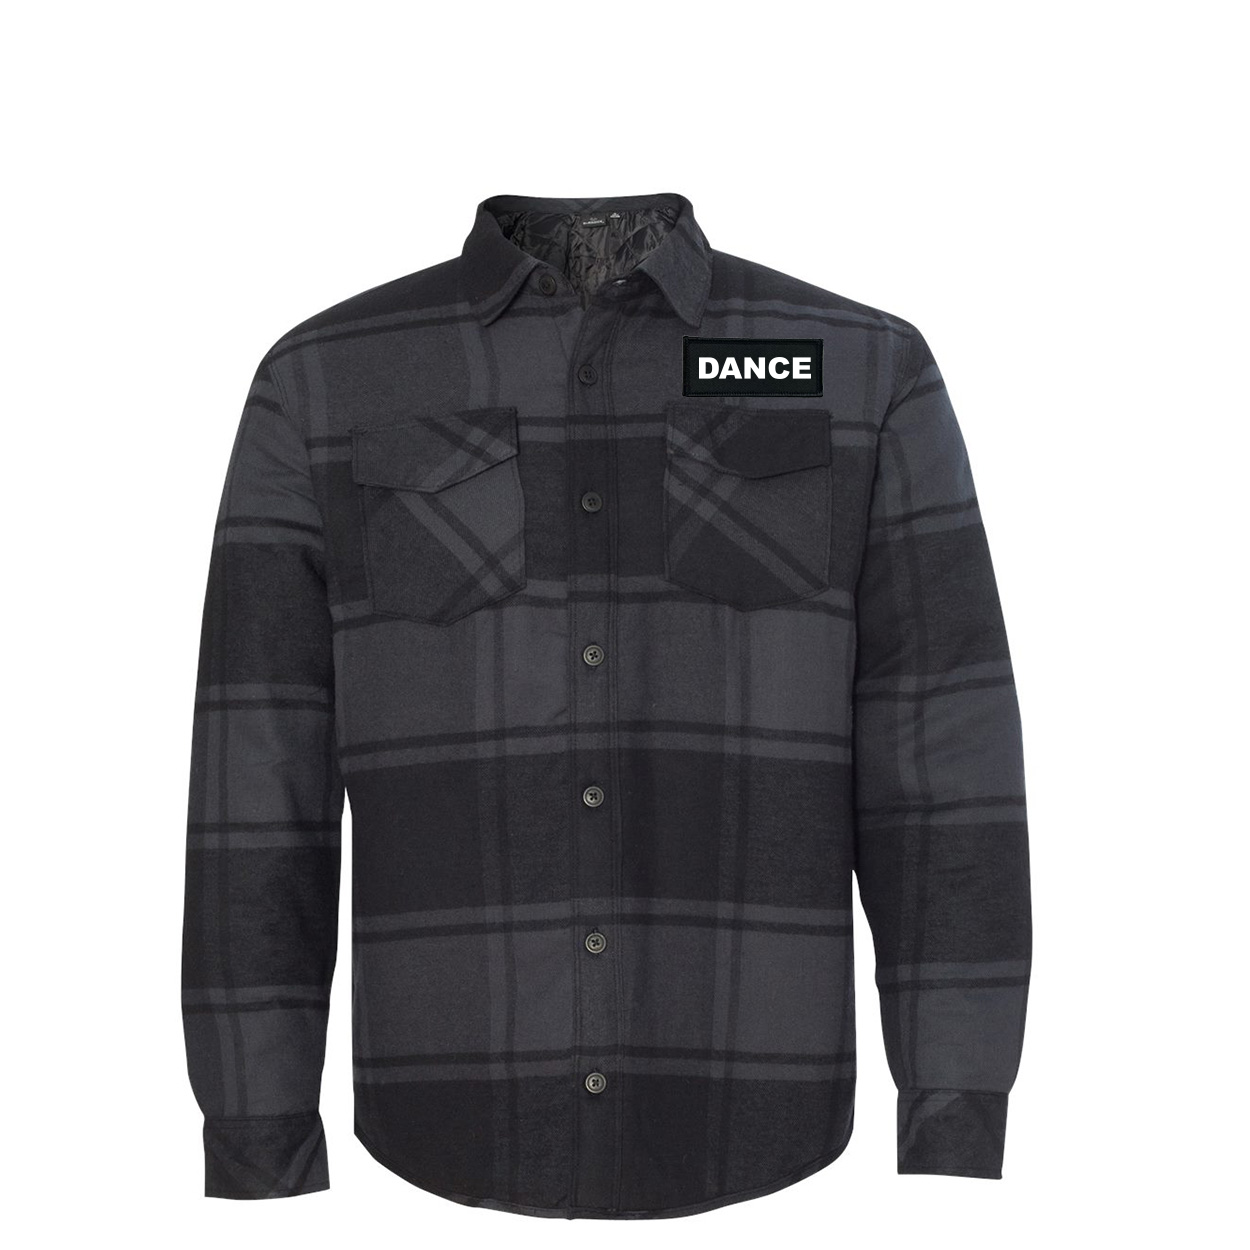 Dance Brand Logo Classic Unisex Woven Patch Quilted Button Flannel Jacket Black/Plaid (White Logo)